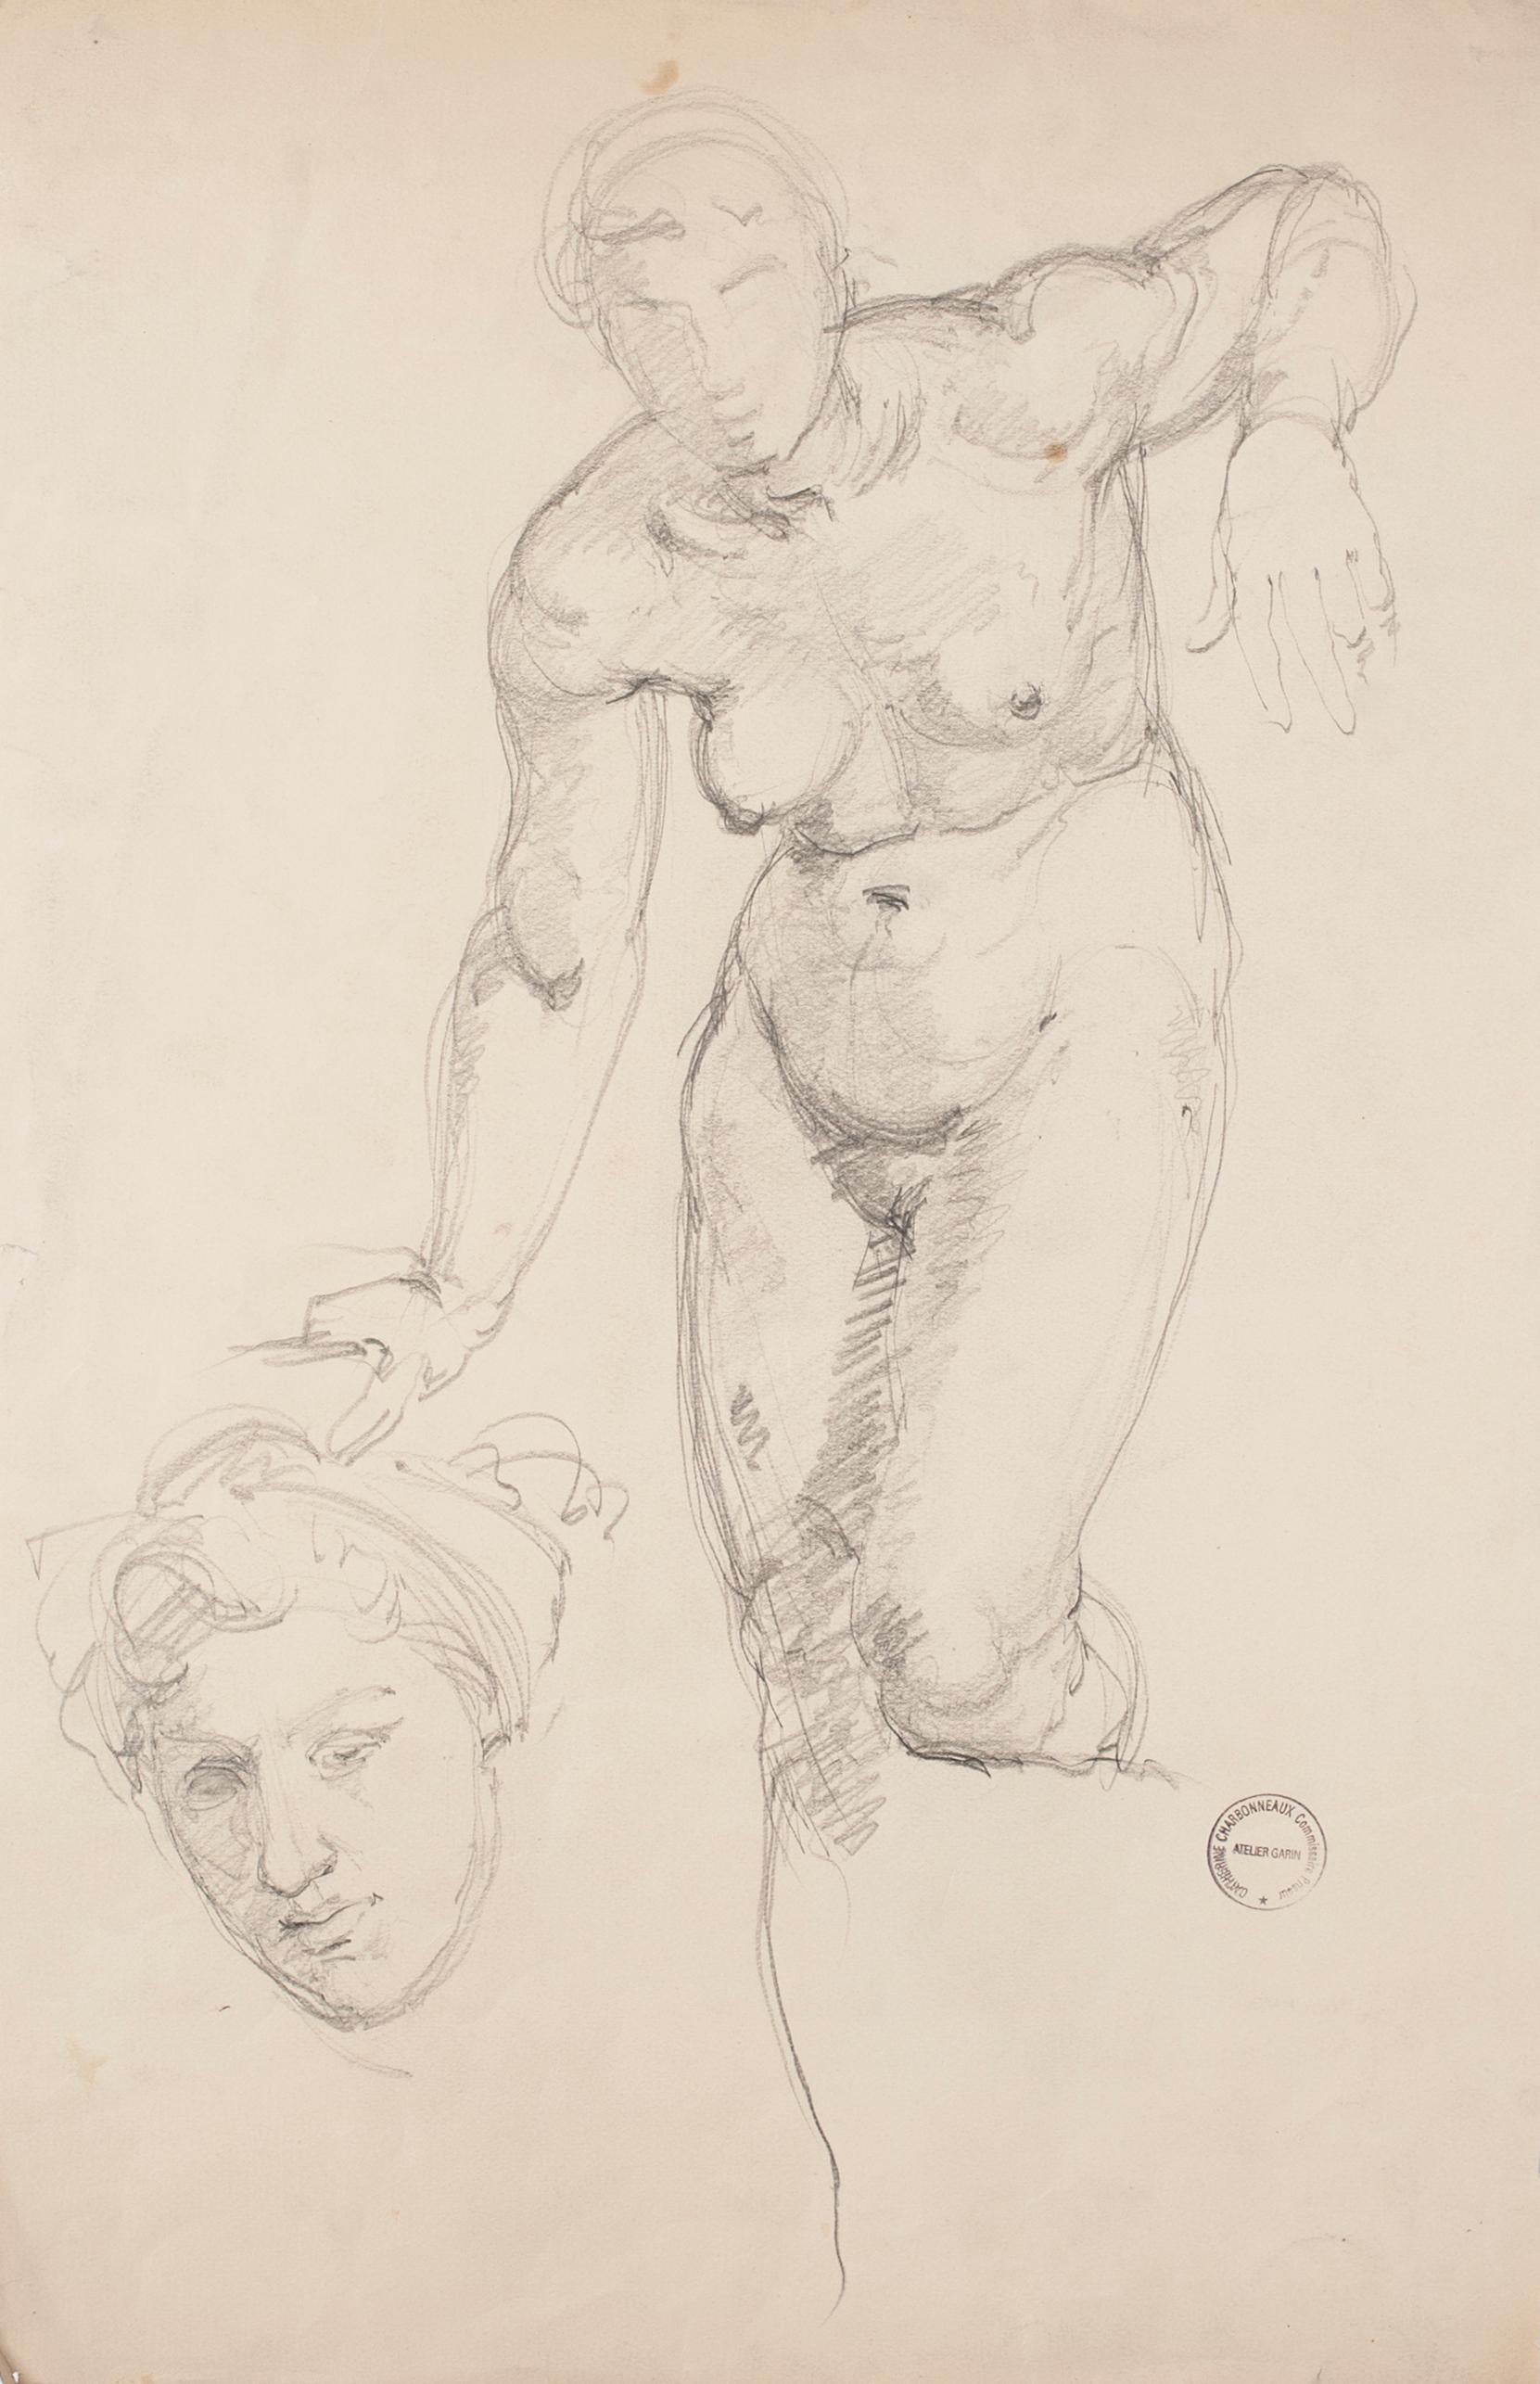 Nude - Original Pencil Drawing on Paper by Paul Garin - 1950s